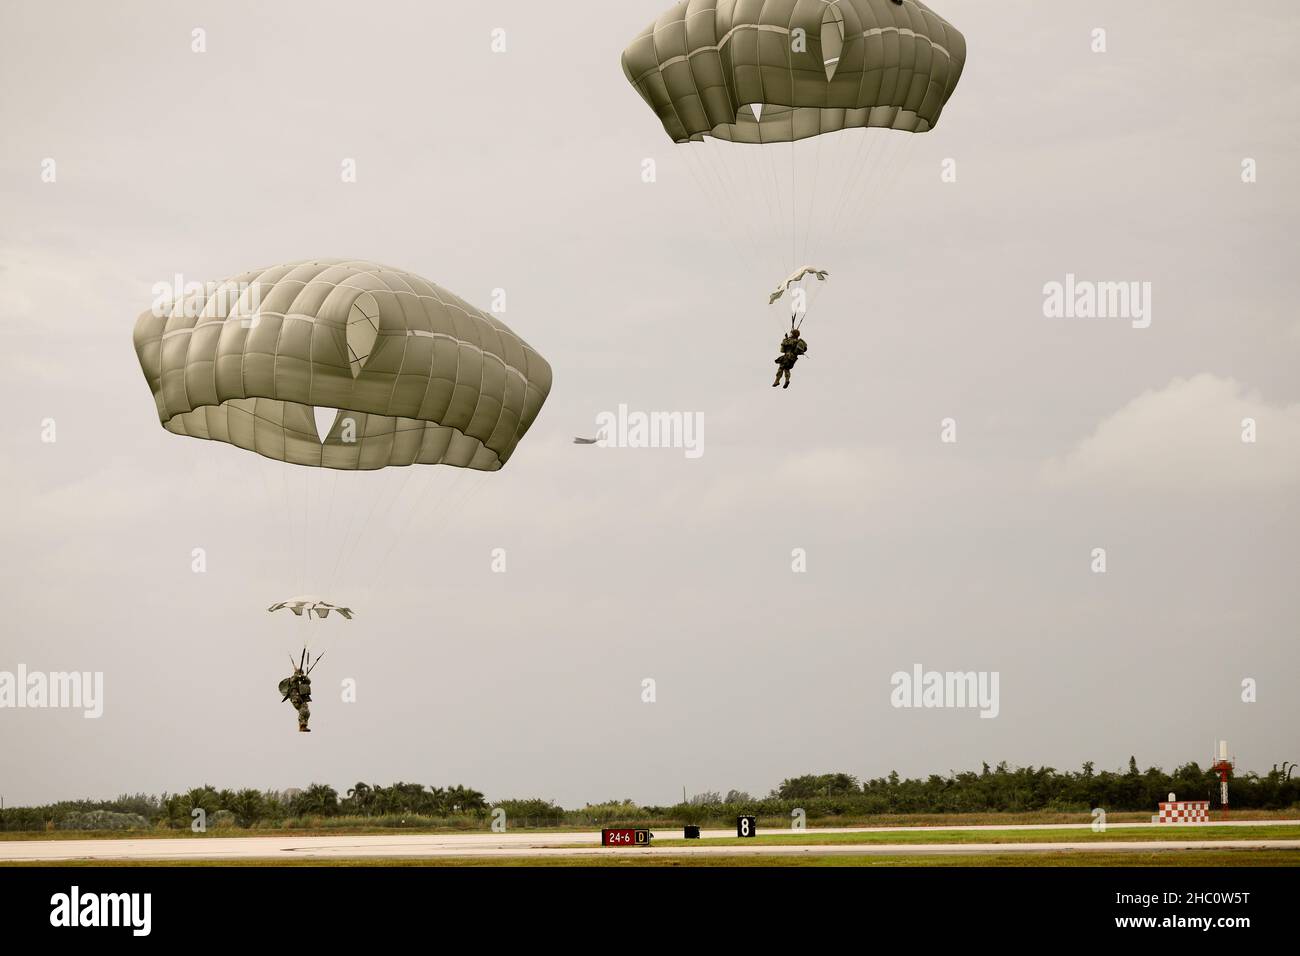 Paratroopers from across the U.S. Army Civil Affairs and Psychological Operations Command (Airborne) participated in airborne operations at Homestead Air Reserve Base, Homestead, Florida,  Nov. 18, 2021.    The event was part of the USACAPOC(A) Airborne Safety Equipment and Evaluation Council hosted by the 478th Civil Affairs Battalion (Airborne), located in Perrine, Florida, 1st Civil Affairs and Psychological Operations Training Brigade. Training opportunities during the week included Jumpmaster Refresher training, the AR-ASEEC, airborne operations and a Deliberate Water Jump to train and ma Stock Photo